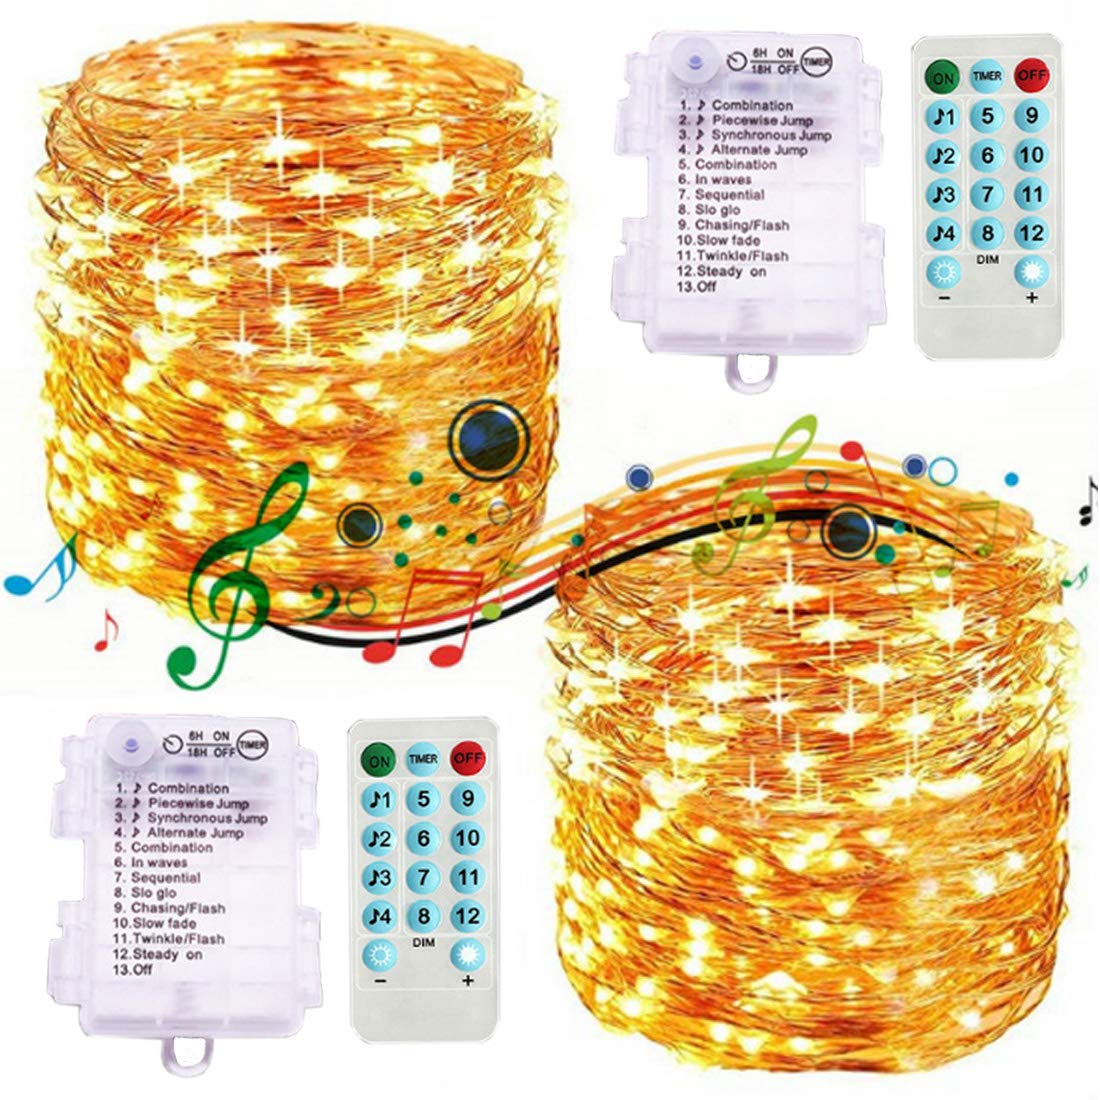 2 Pack Sound Activated Music String Lights,32.8ft 100LEDs 12 Modes Waterproof Copper Wire AA Battery Powered Remote Control String Lights Warm White for Bars,Parties,Christmas,Wedding Dance.